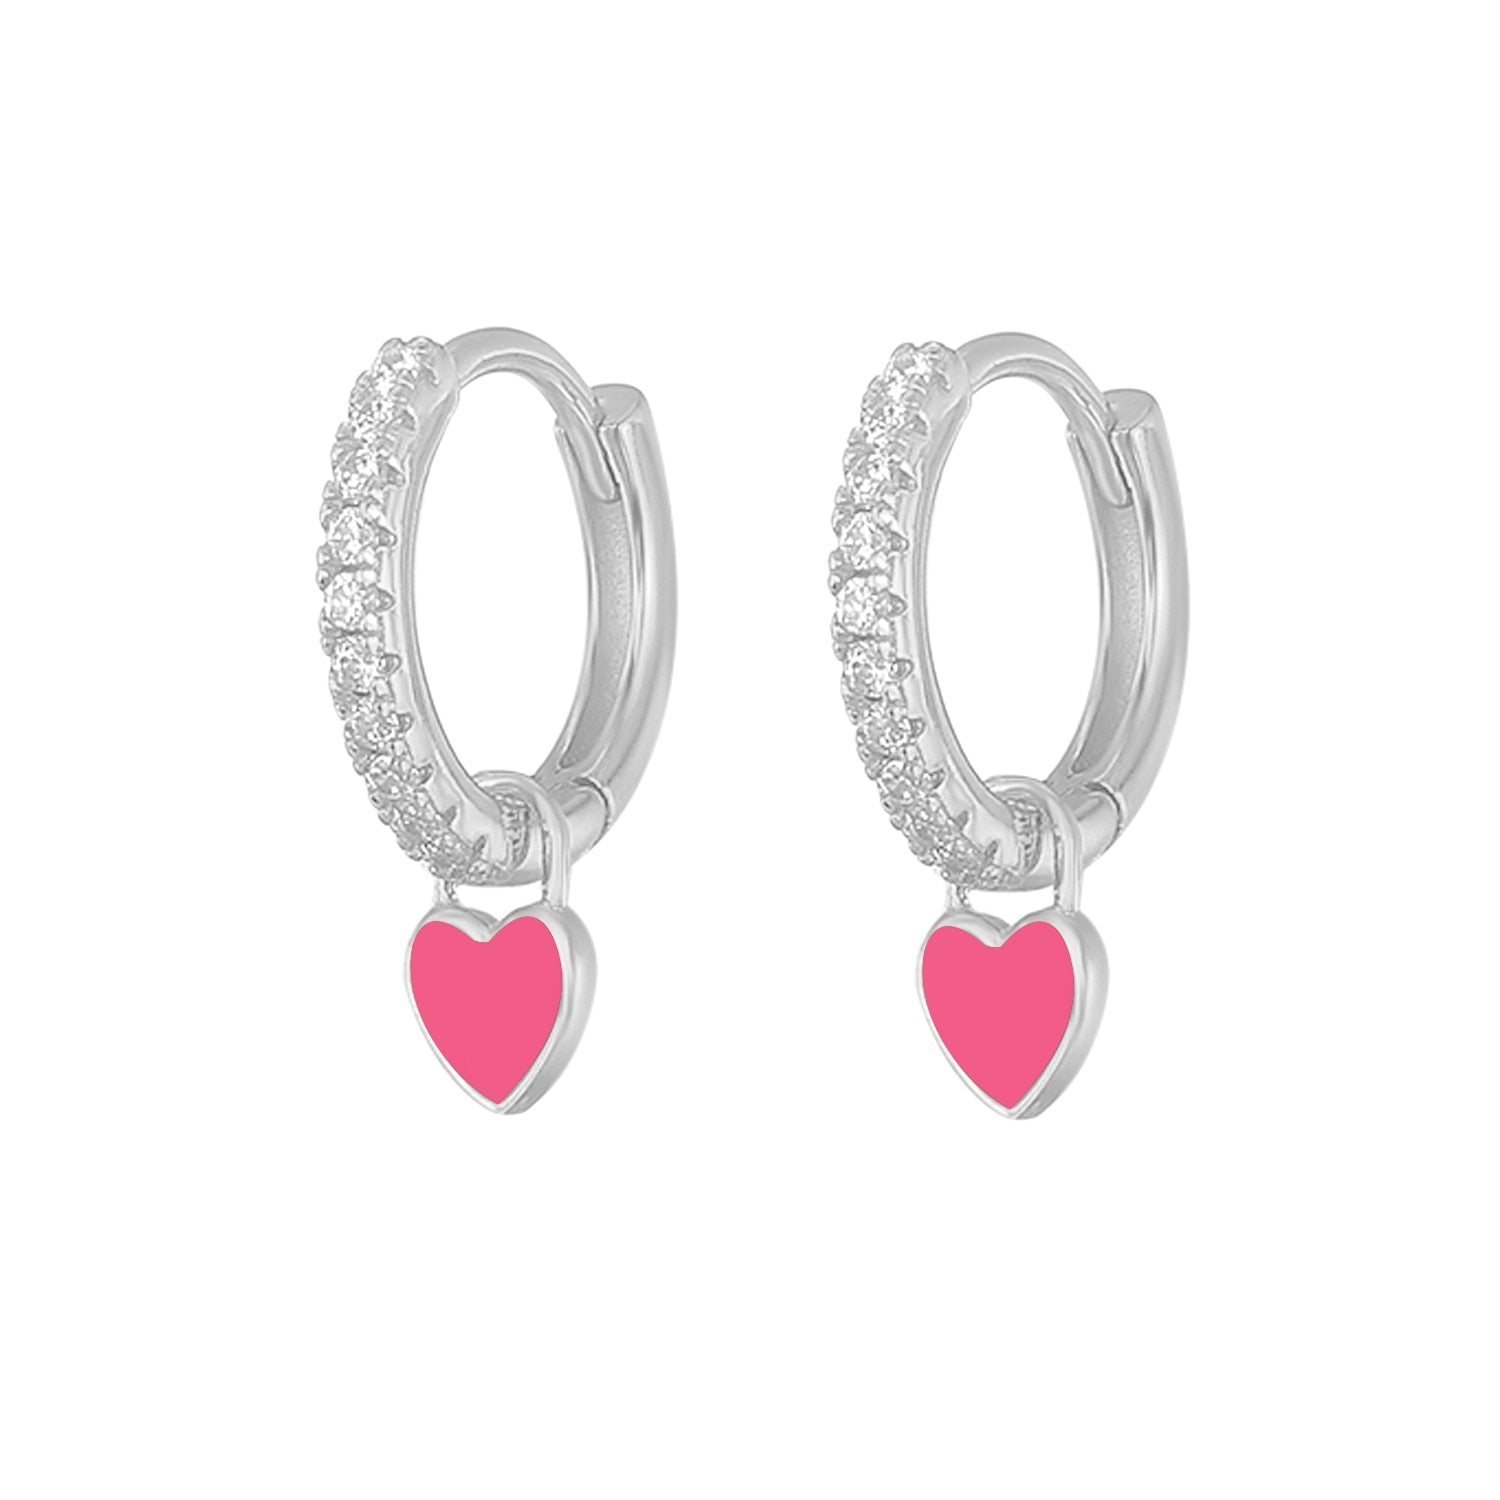 Aide Silver Color Hoop Earrings With Cute Candy Neon Color Enamel Heart Charm Drop Earring Gold Color For Girls Party Jewelry - Charlie Dolly